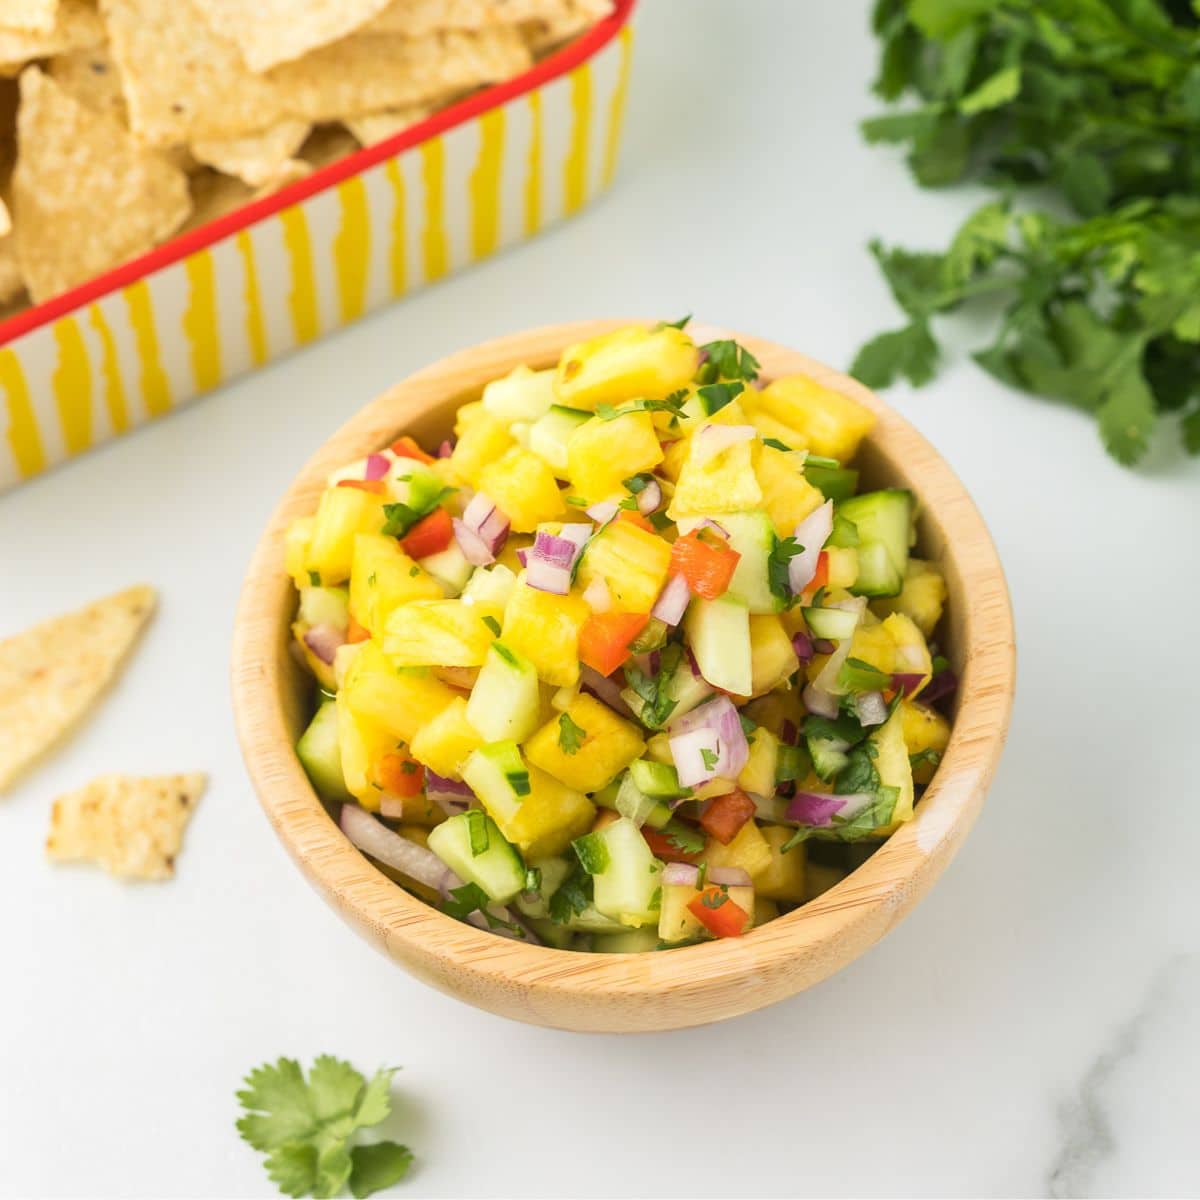 Pineapple salsa in a wooden bowl with cilantro and chips.